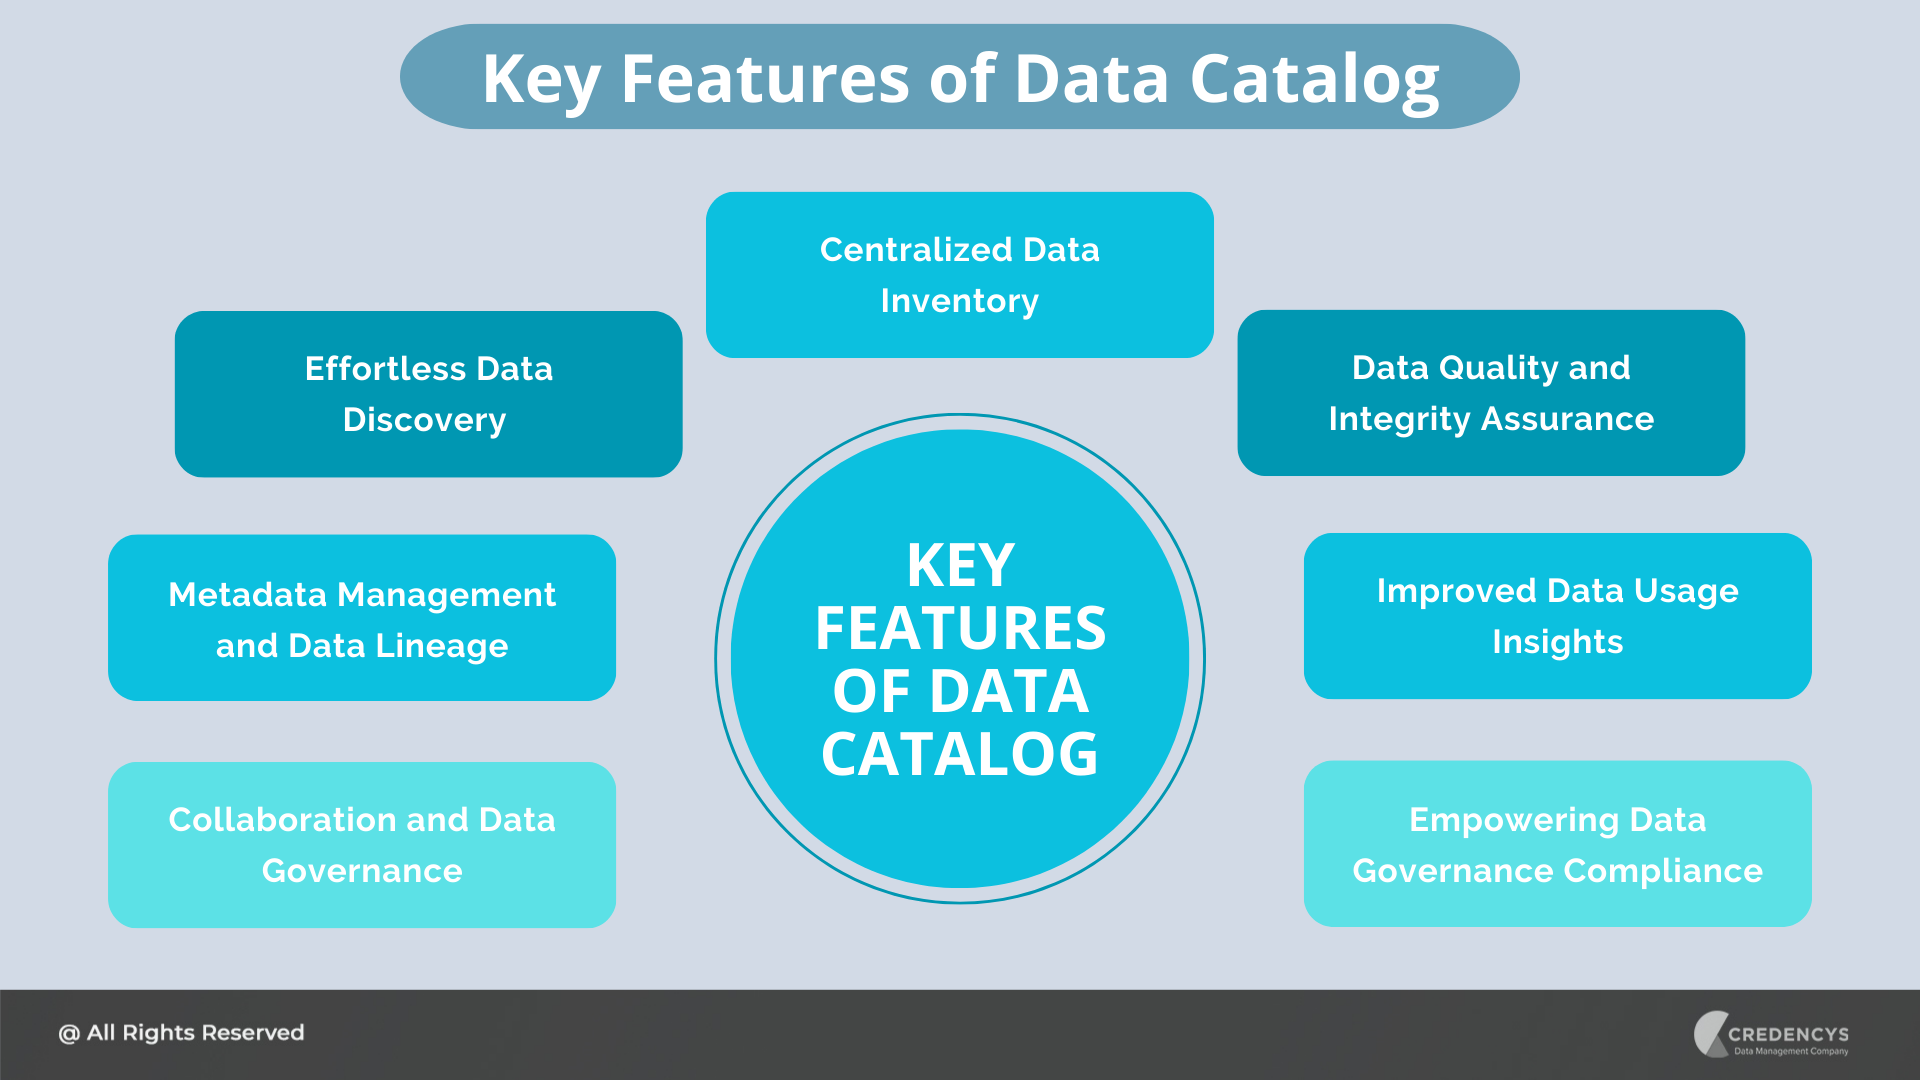 Key Features of Data Catalog